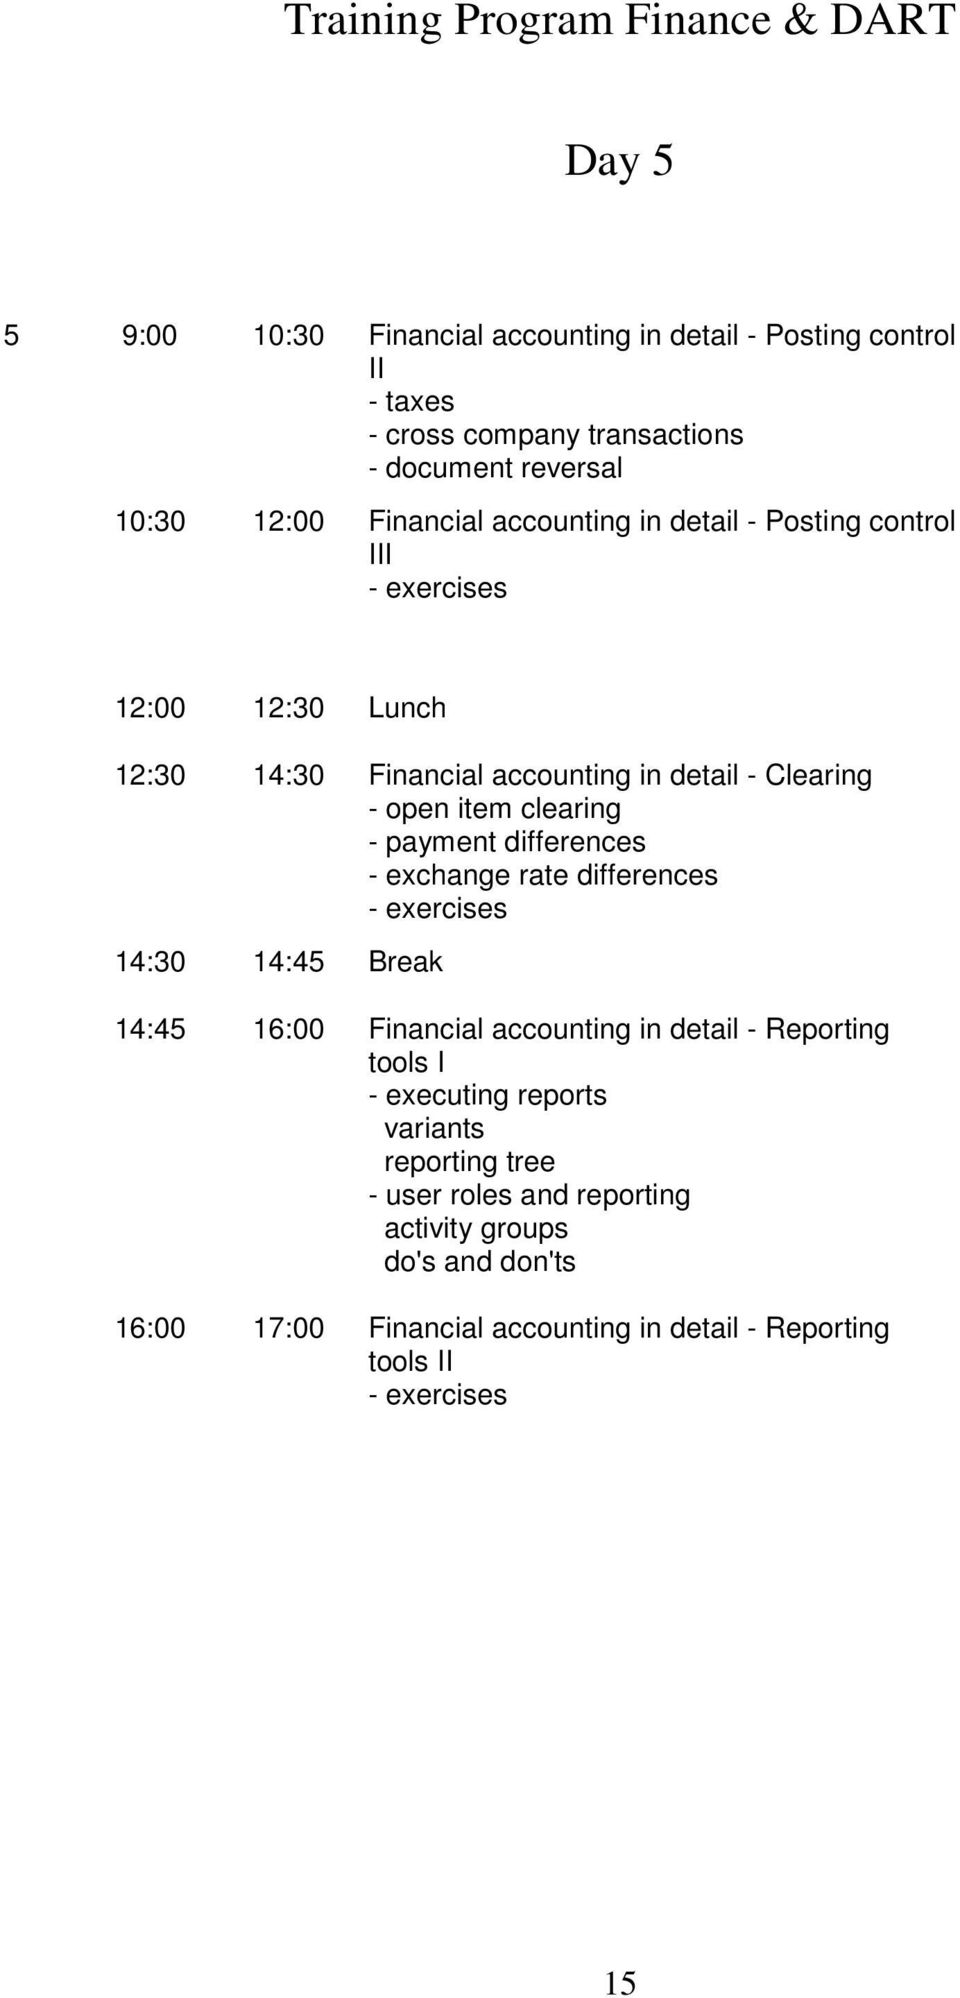 clearing - payment differences - exchange rate differences - exercises 14:45 16:00 Financial accounting in detail - Reporting tools I - executing reports